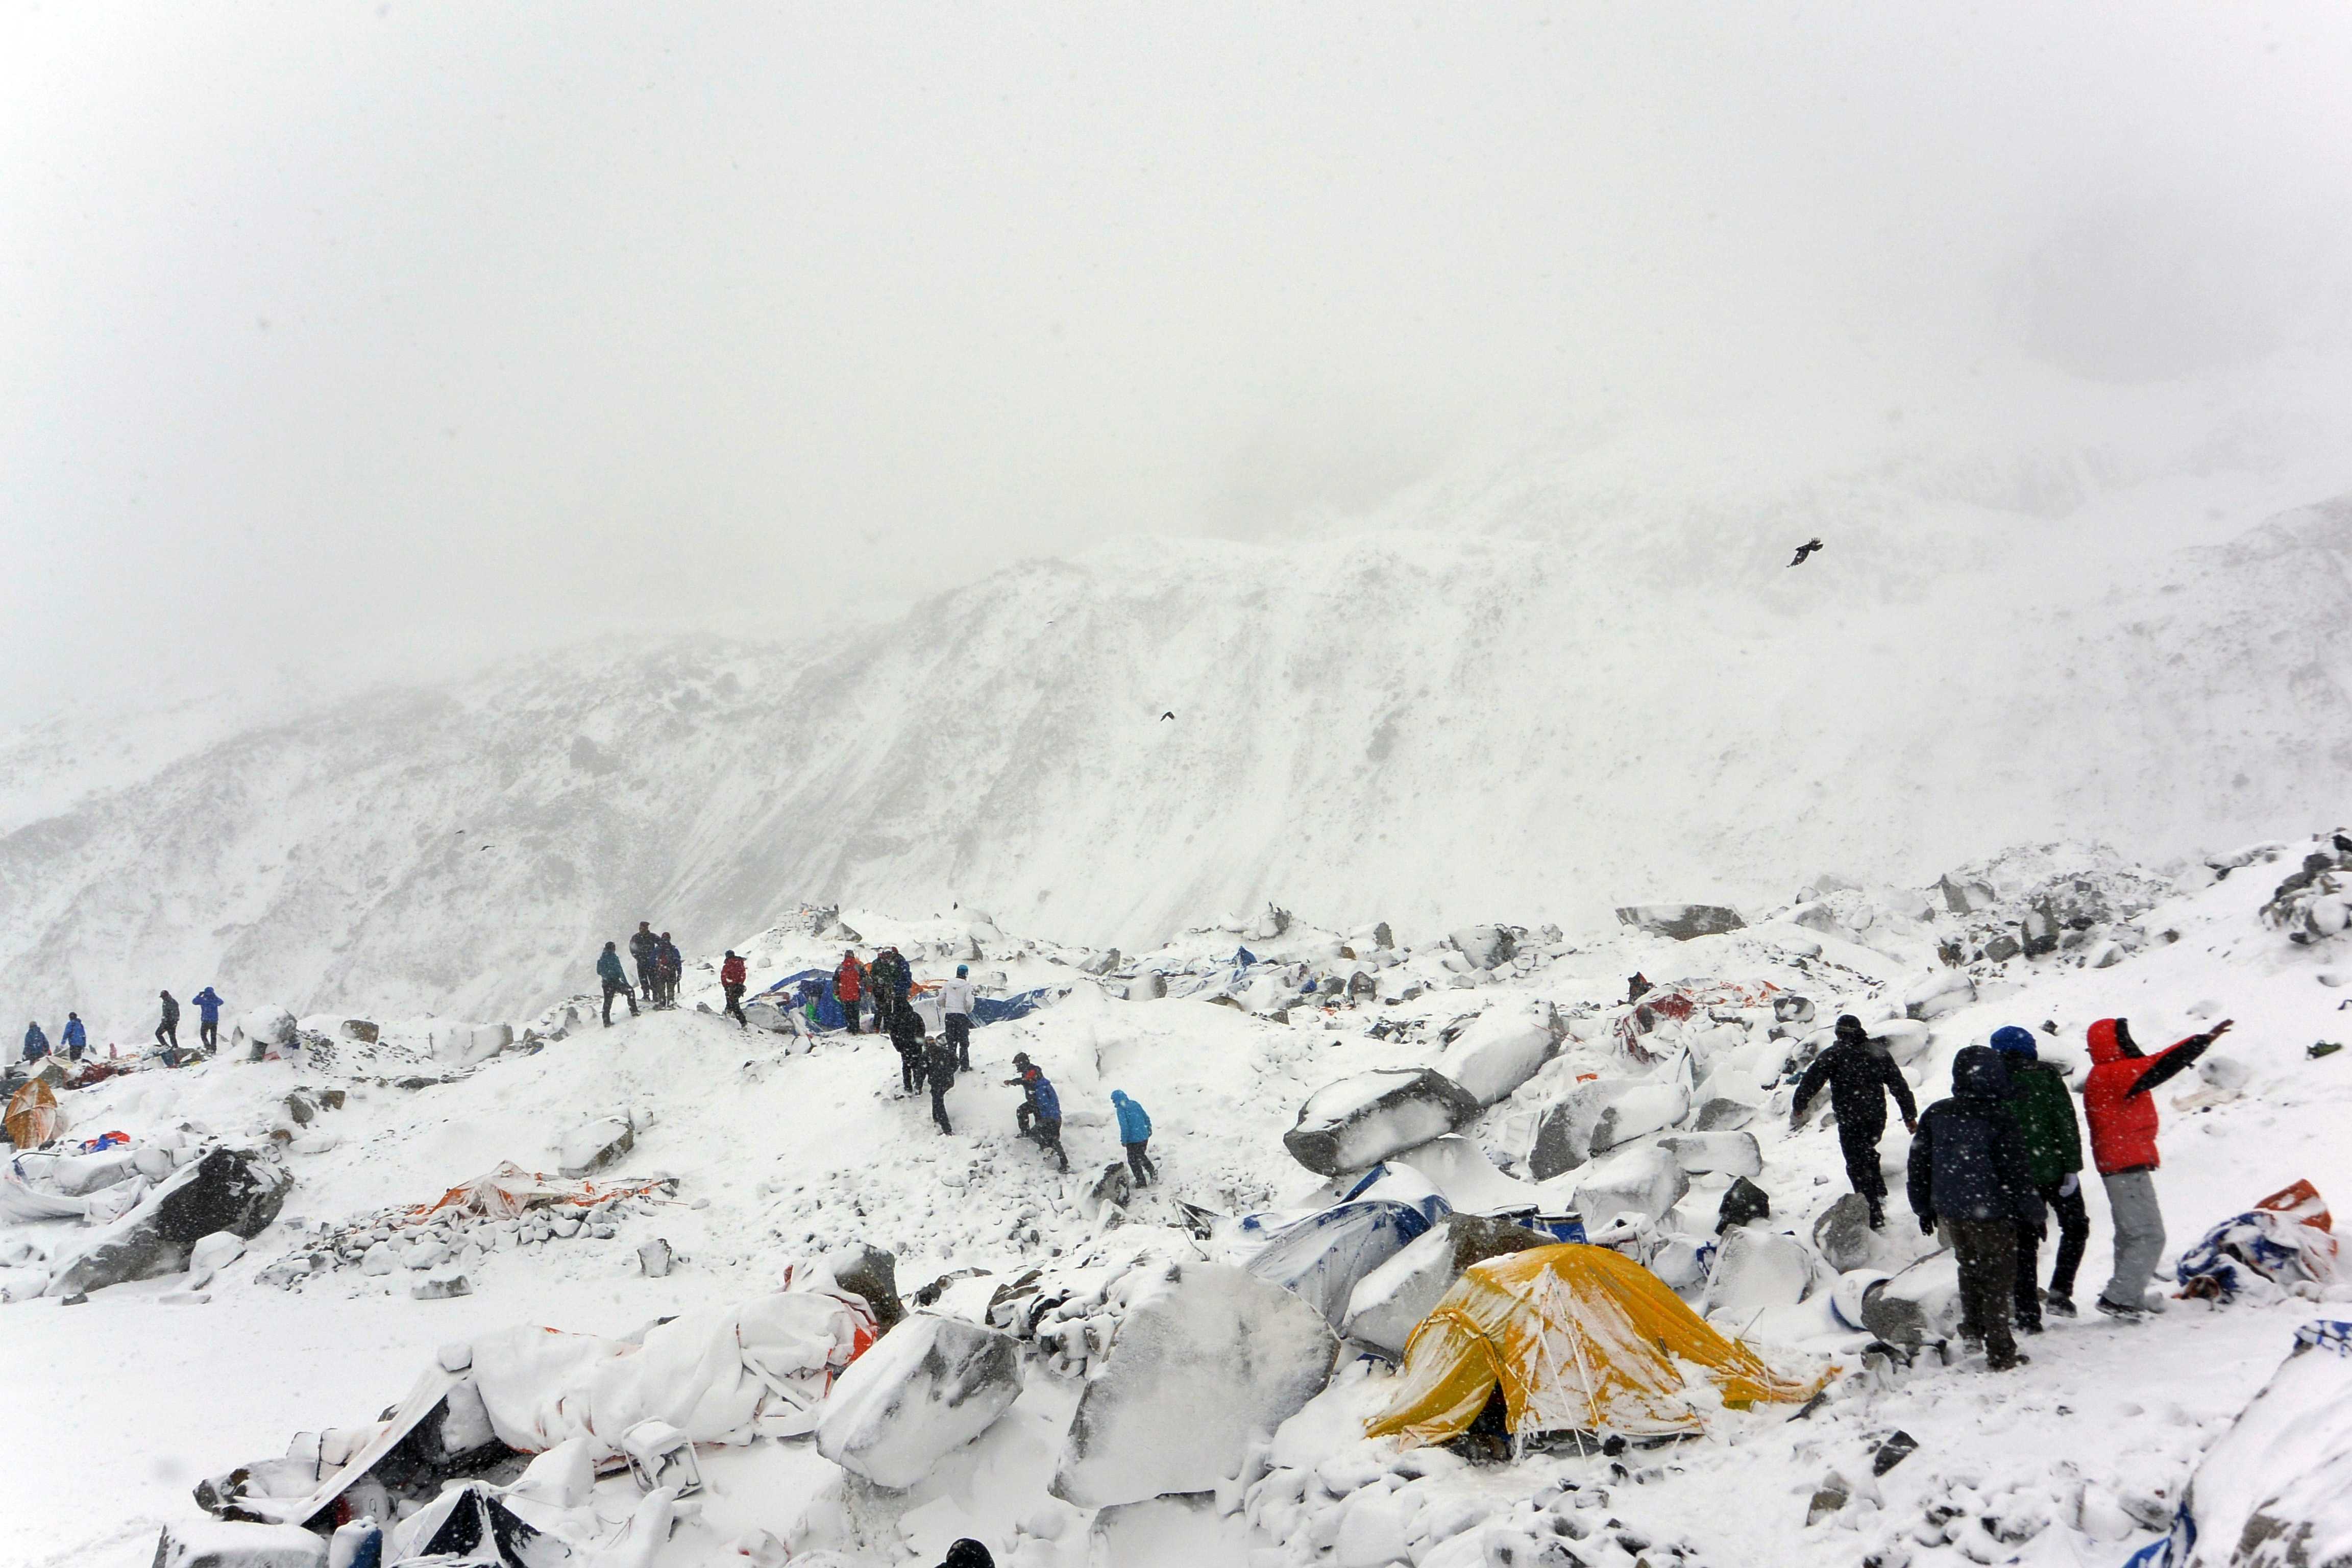 On April 25, 2015, climbers searched for fellow climbers caught in an avalanche at the base camp on the Nepal side of Mount Everest.